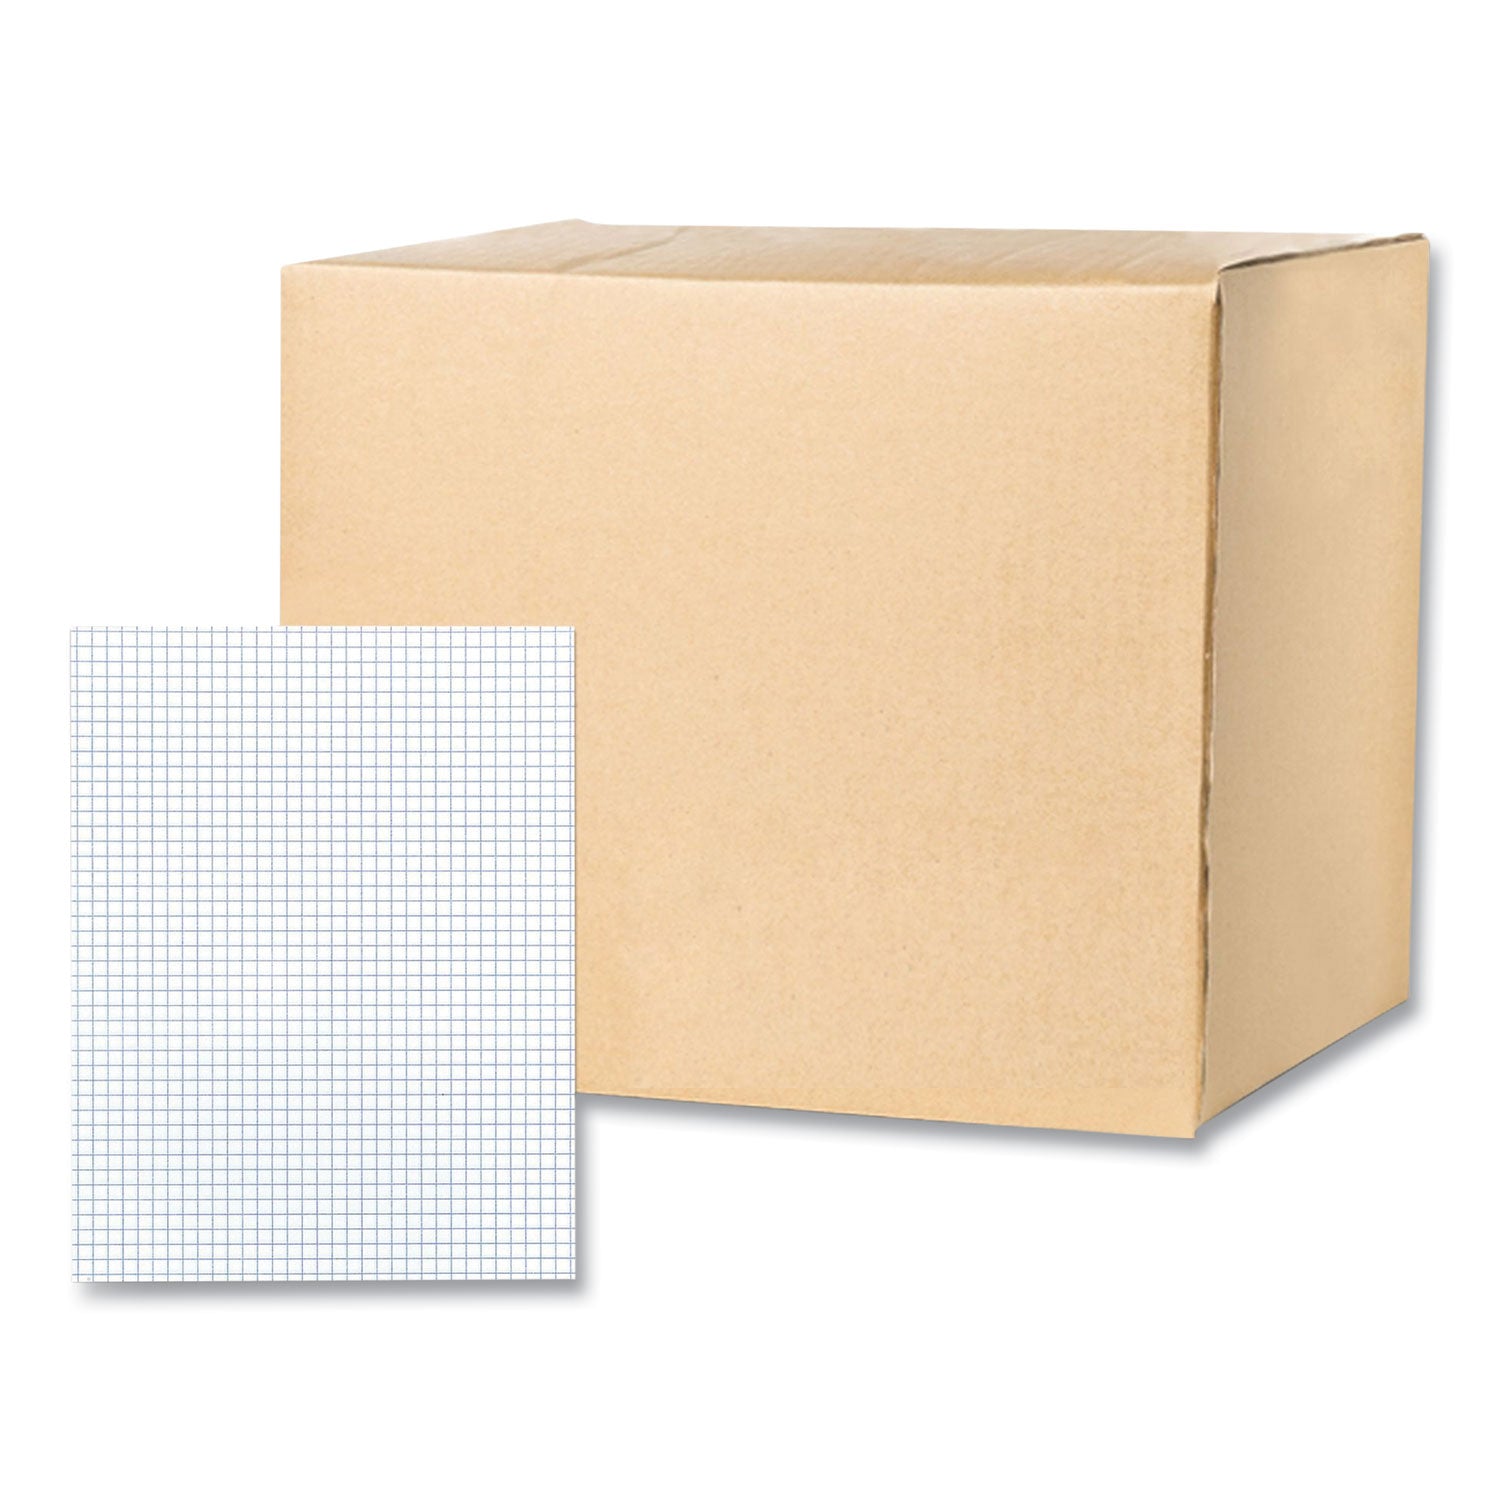 gummed-pad-4-sq-in-quadrille-rule-50-white-85-x-11-sheets-72-carton-ships-in-4-6-business-days_roa95160cs - 1